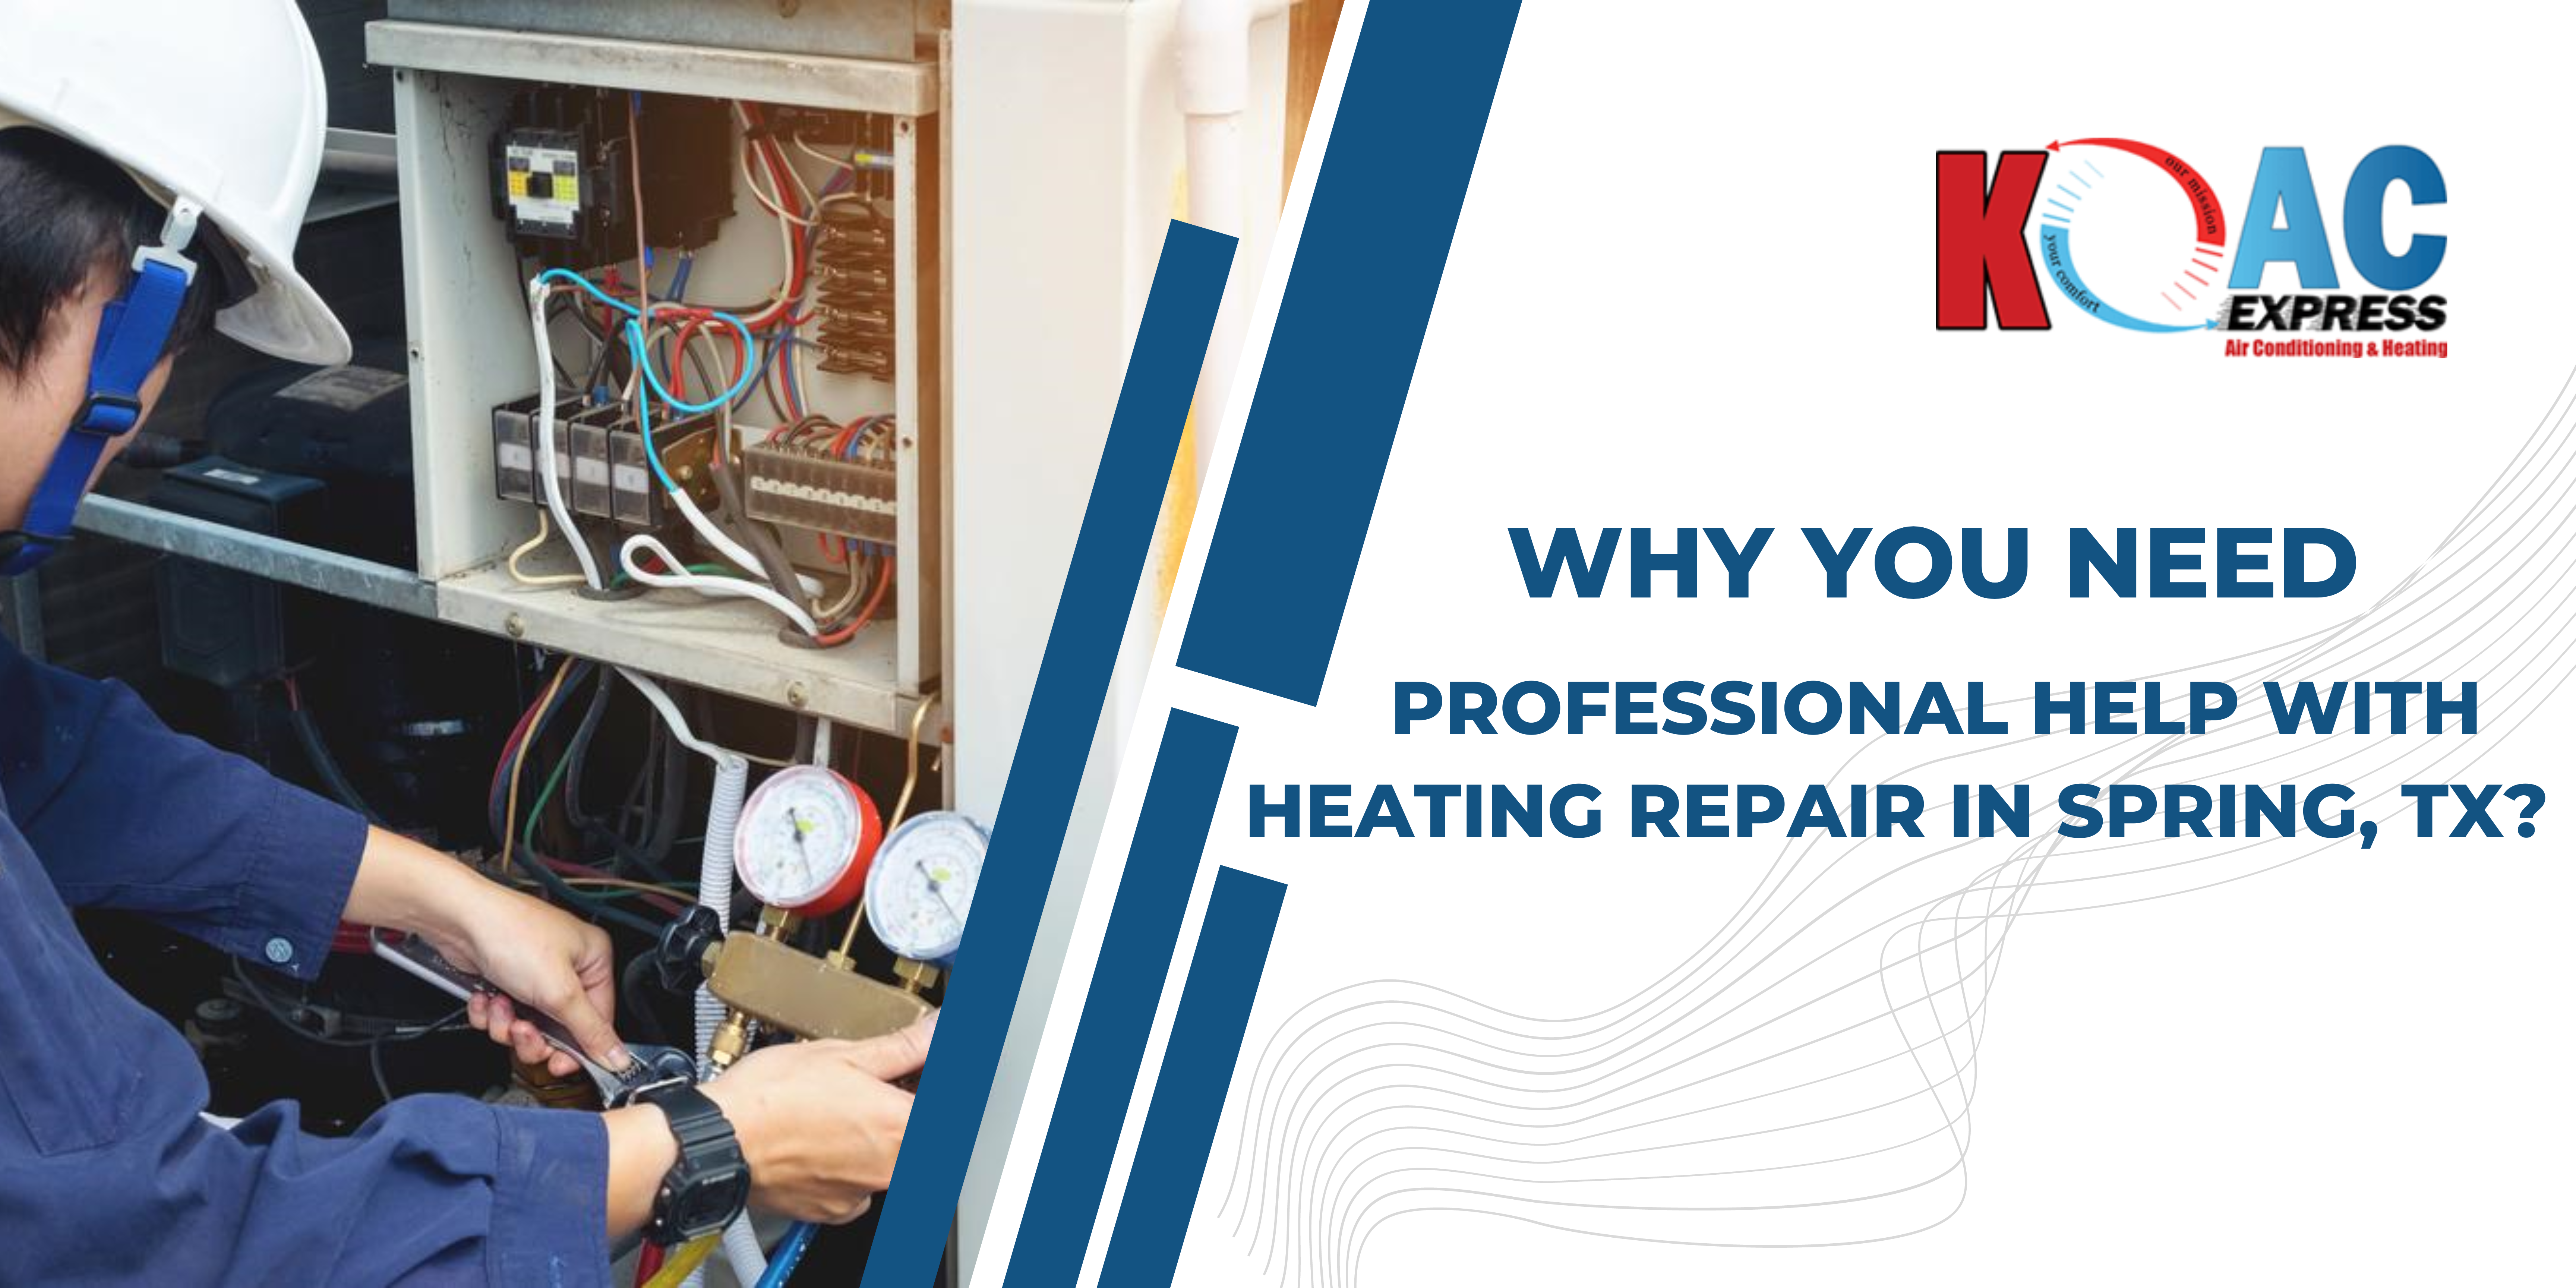 Why You Need Professional Help with Heating Repair in Spring, TX?